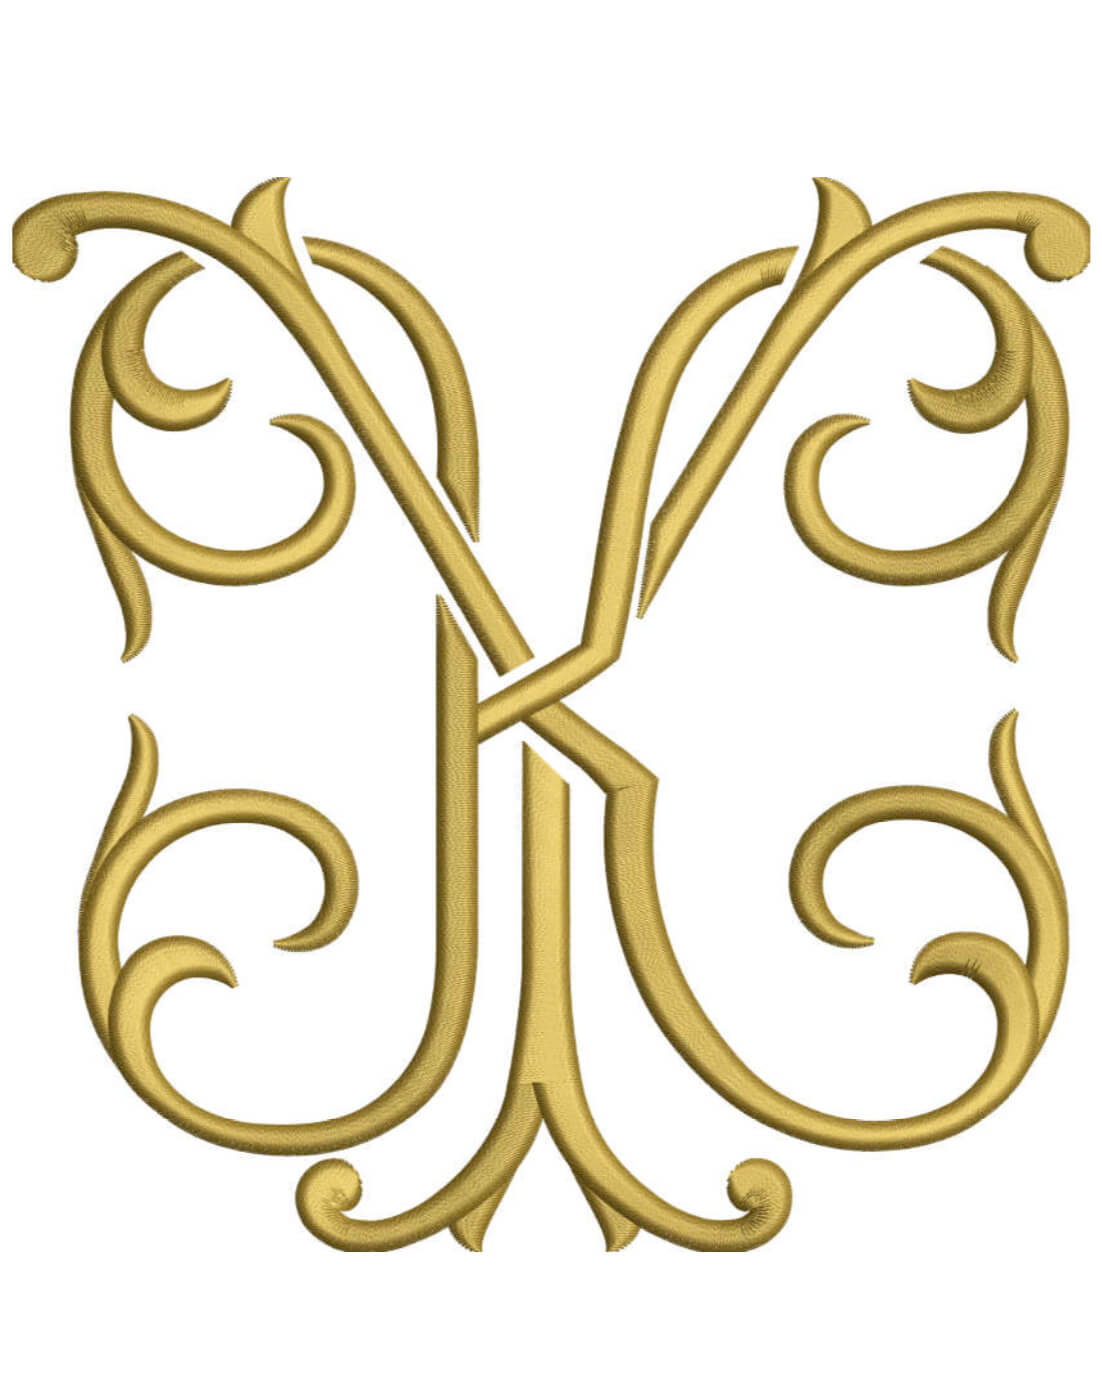 Monogram Couture KY for Embroidery